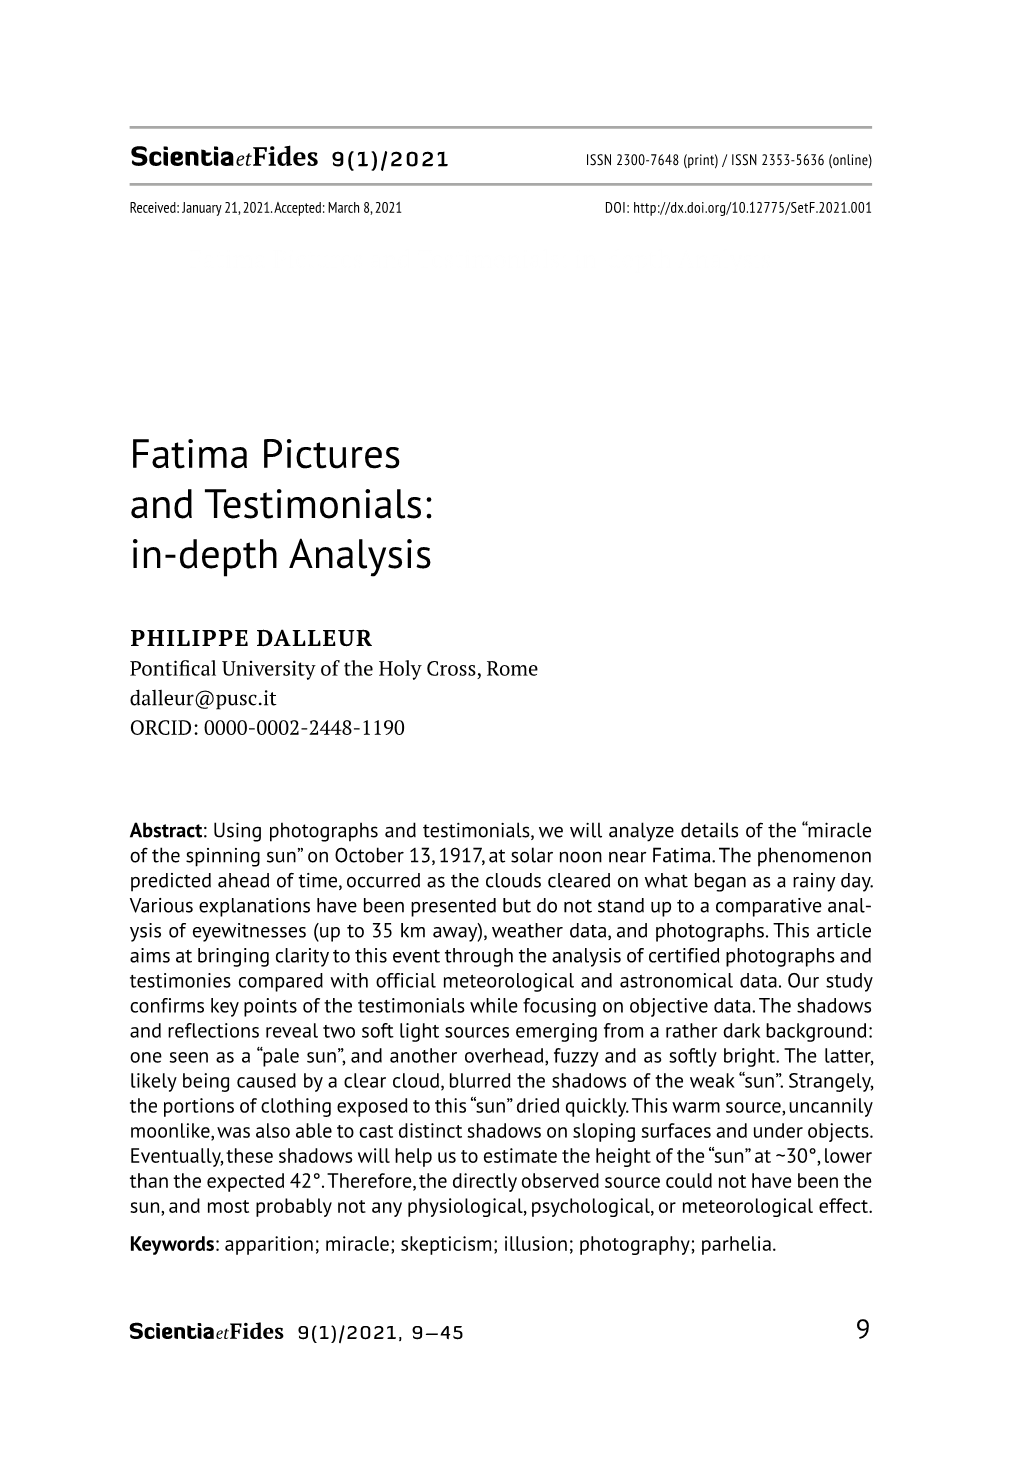 Fatima Pictures and Testimonials: In-Depth Analysis